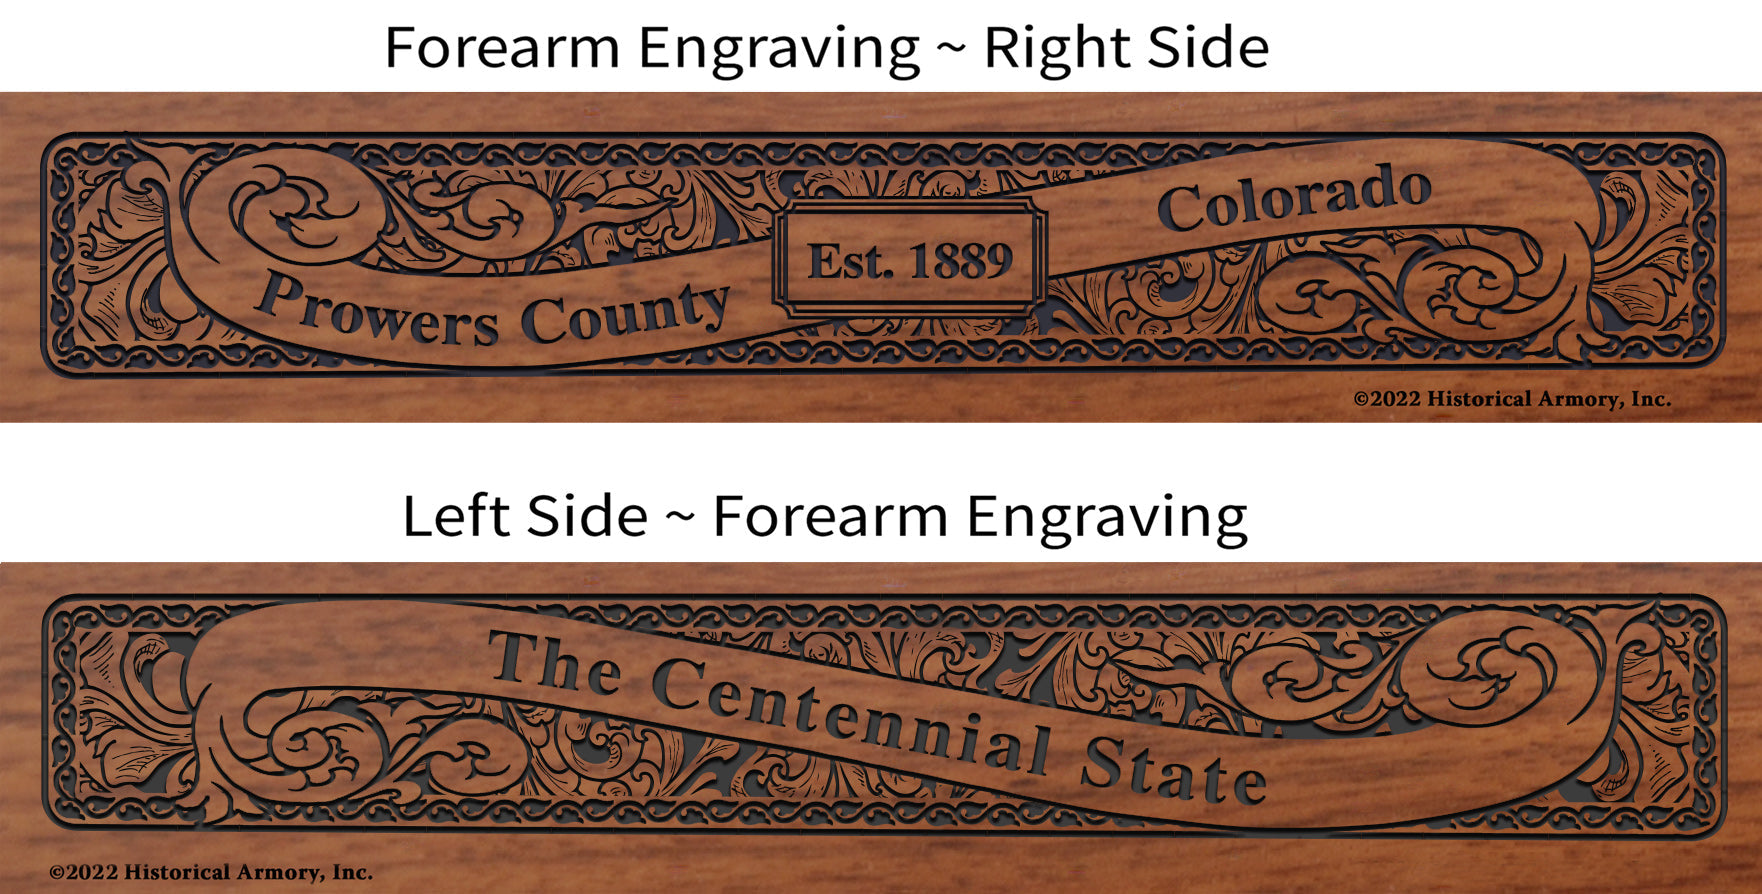 Prowers County Colorado Engraved Rifle Forearm